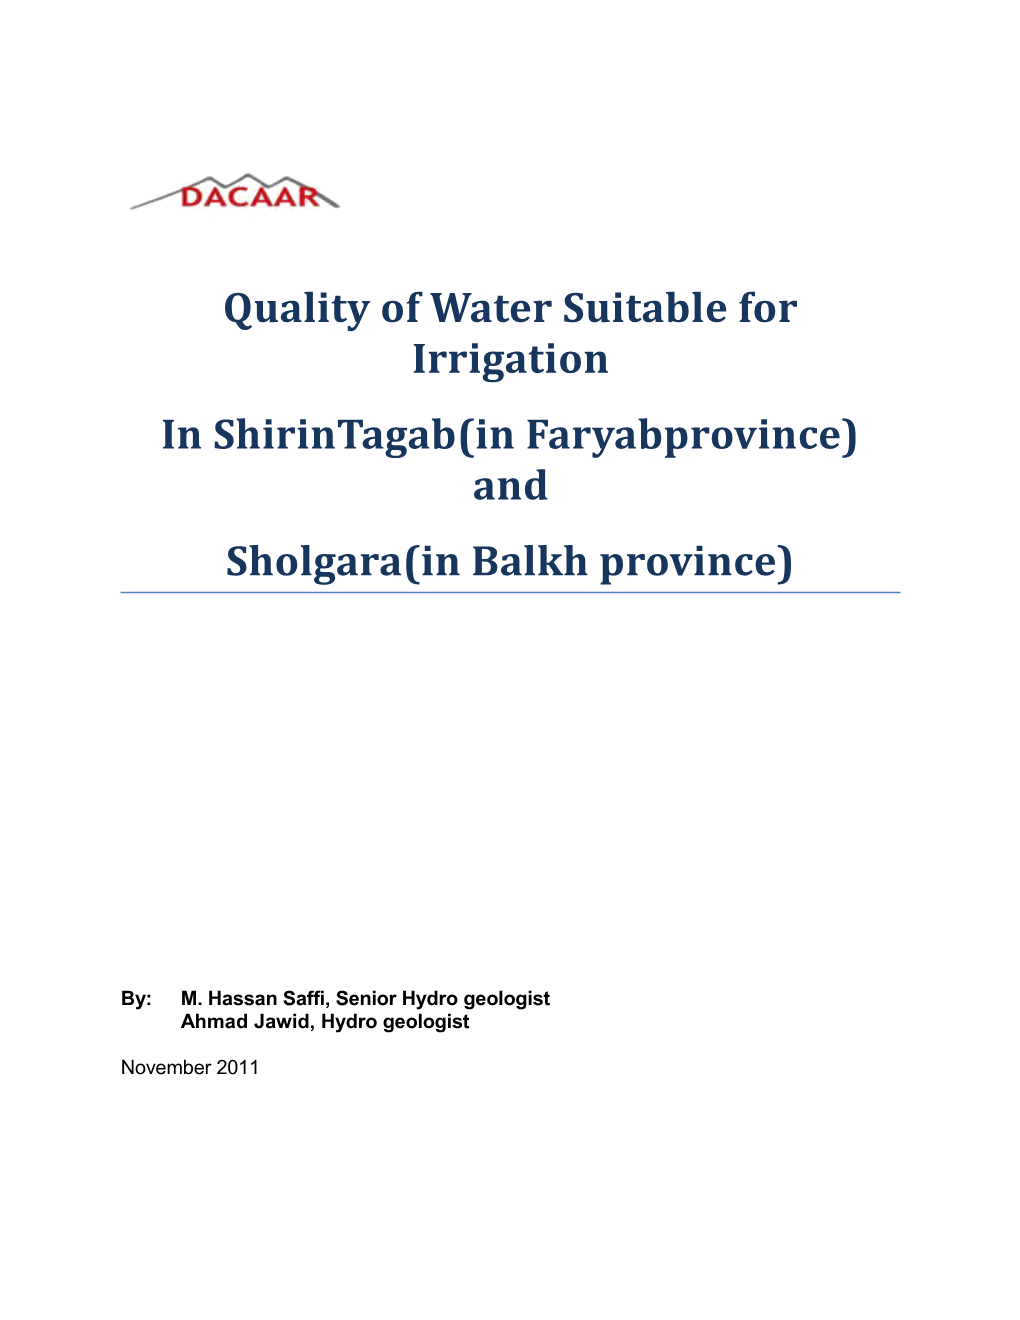 Quality of Water Suitable for Irrigation